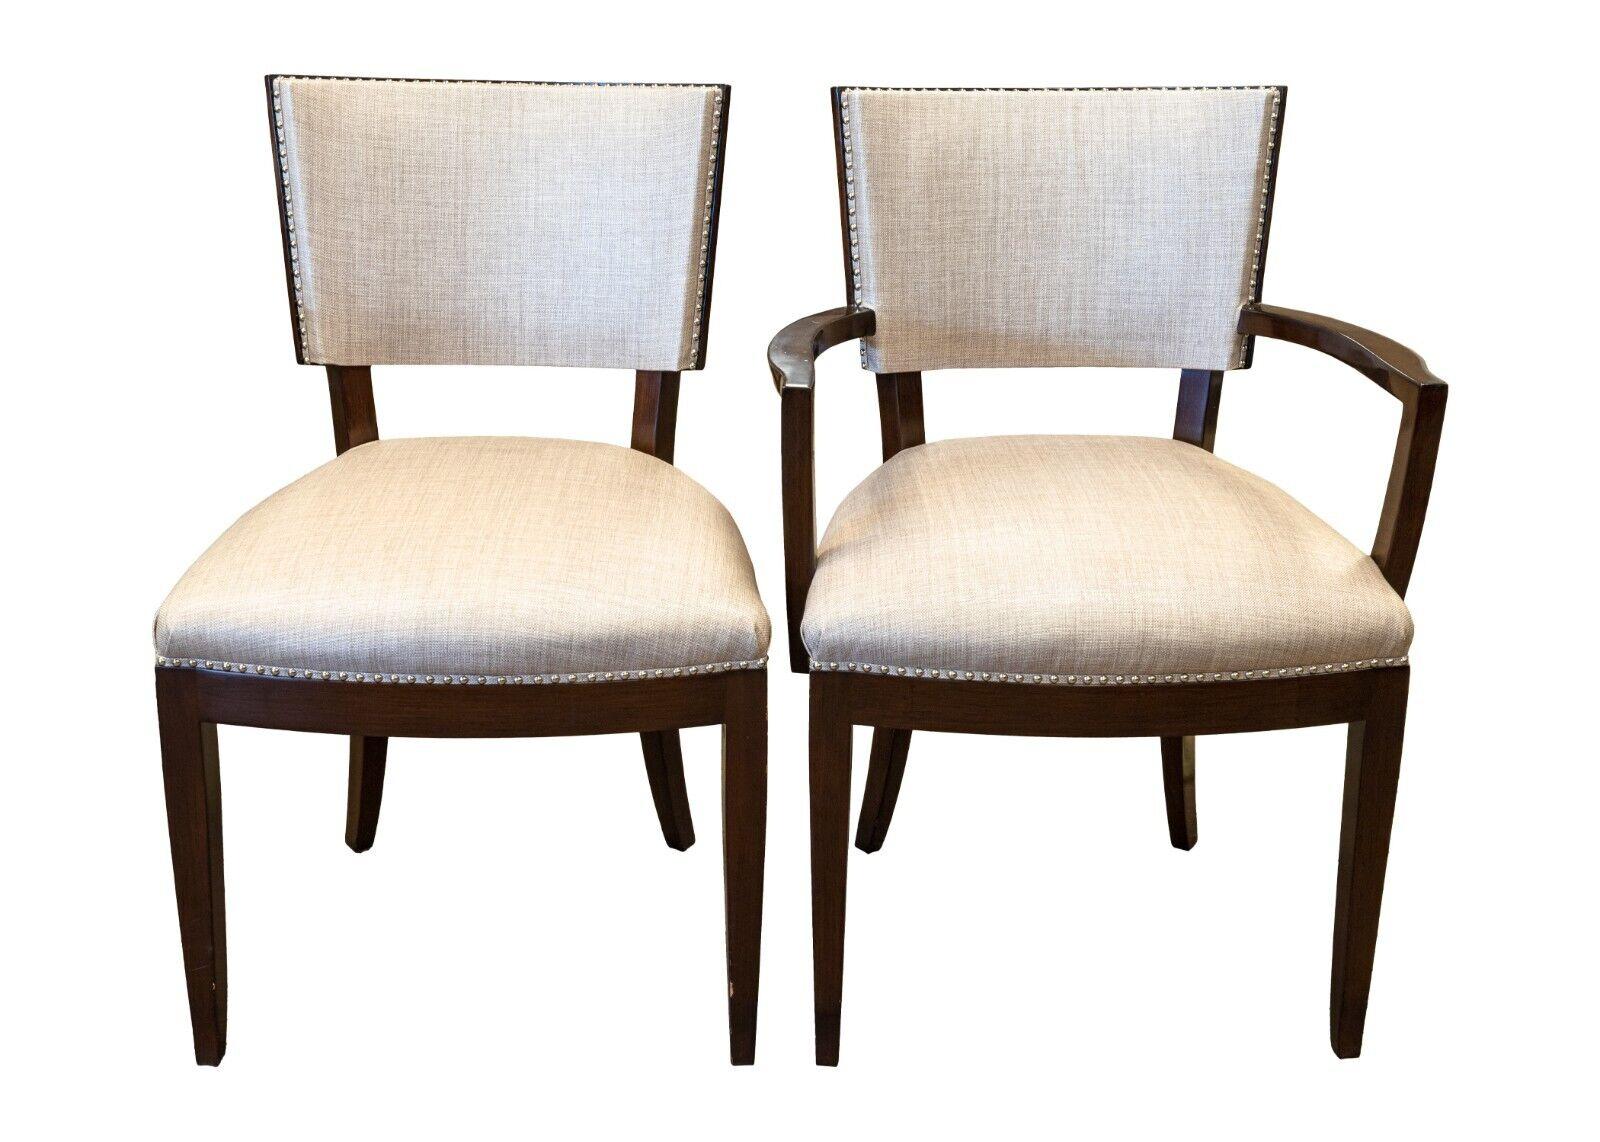 A set of 6 A. Rudin wood dining room chairs. This handsome set of dining room chairs feature two styles of chair. There are two end chairs which feature arms, and four side chairs that do not have arms. These chairs are constructed with a dark wood